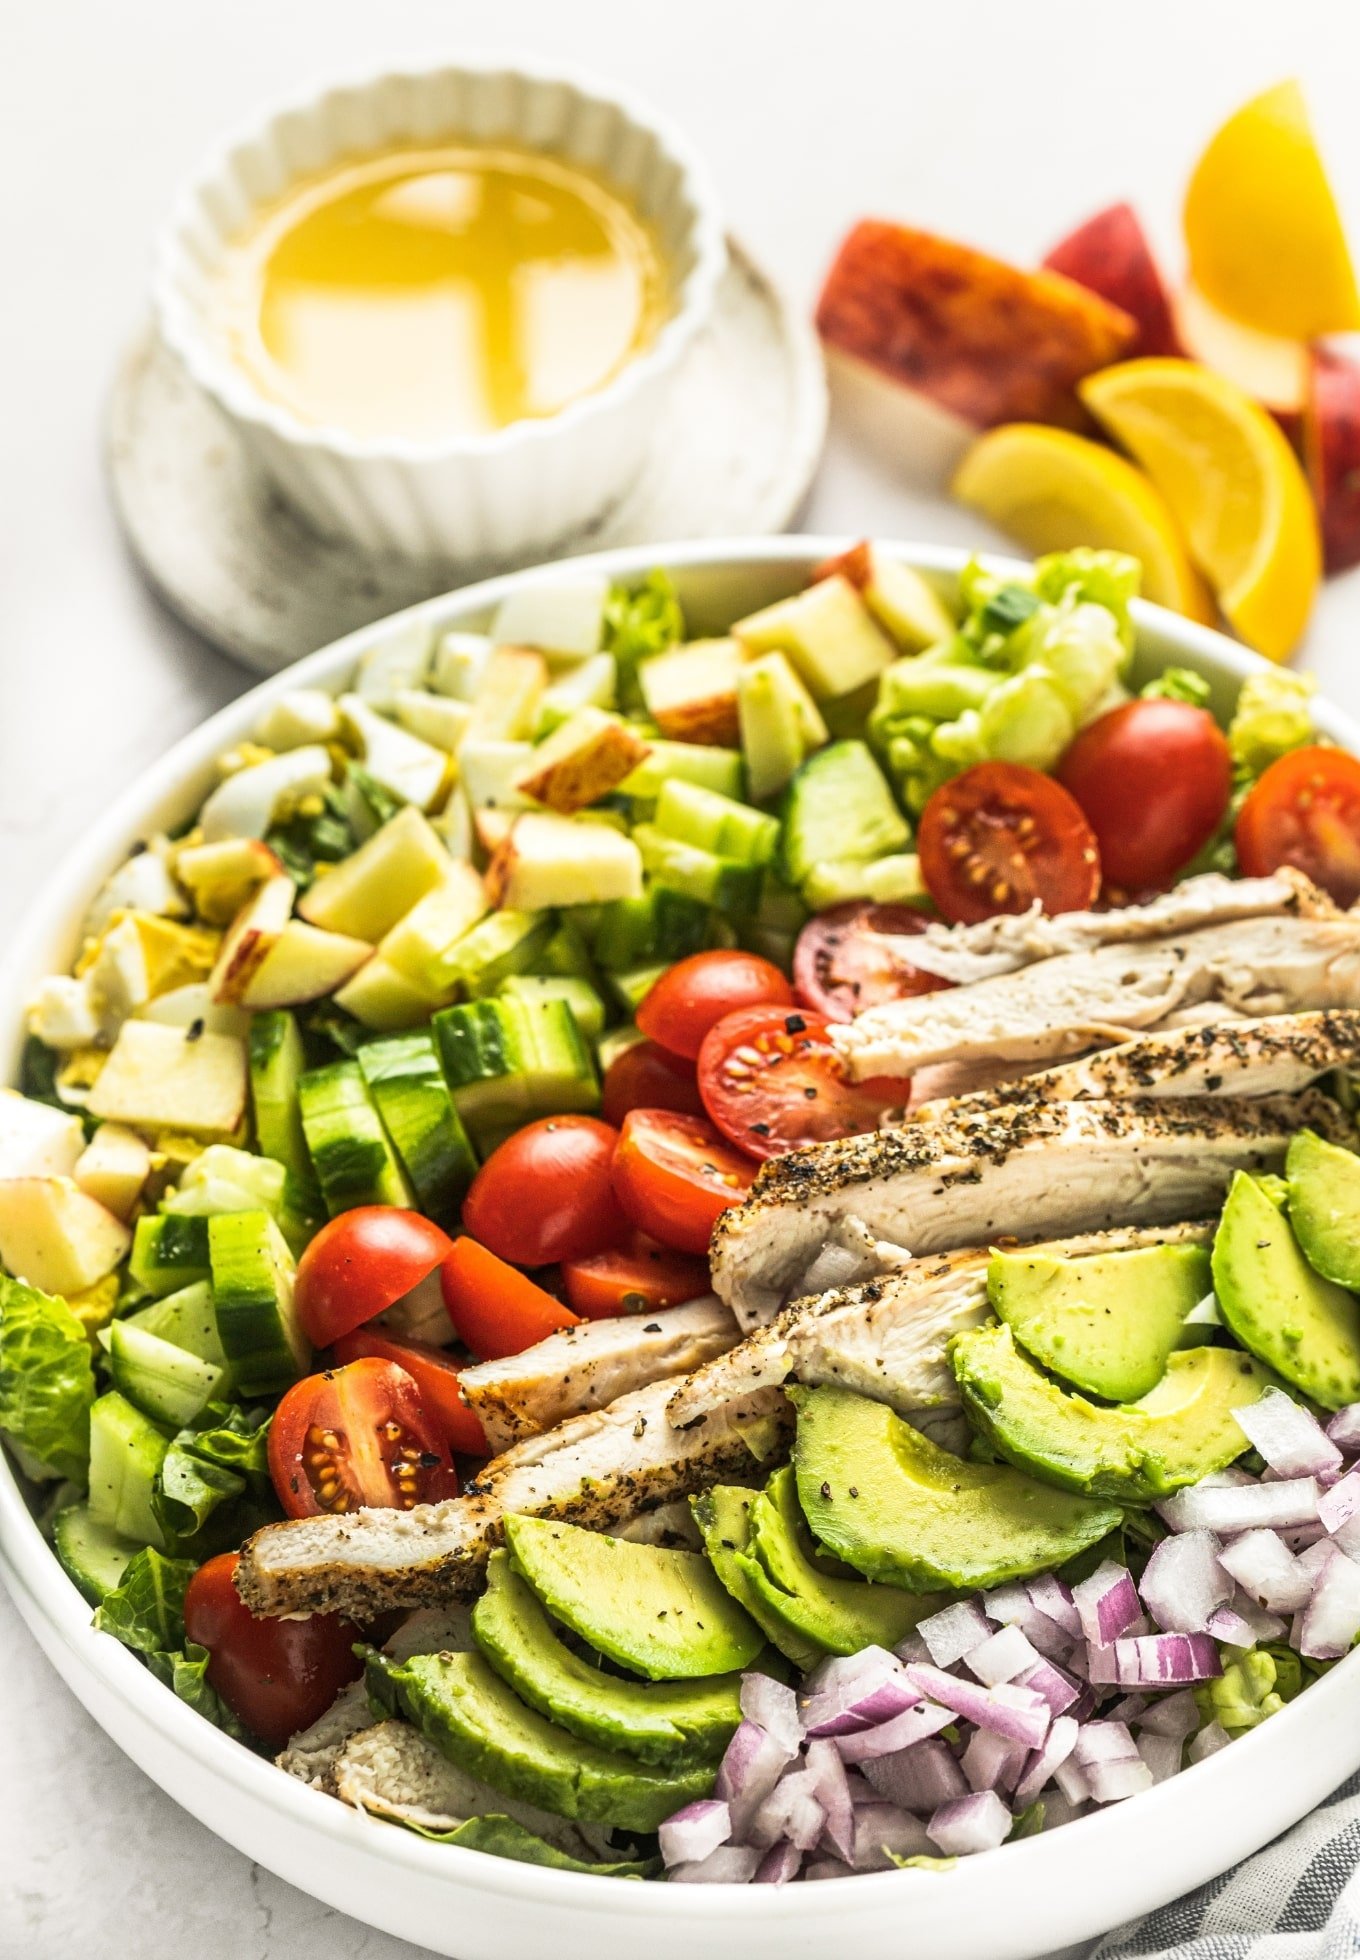 https://thewholecook.com/wp-content/uploads/2021/06/Lemon-Chicken-Cobb-Salad-by-The-Whole-Cook-VERTICAL1.jpg